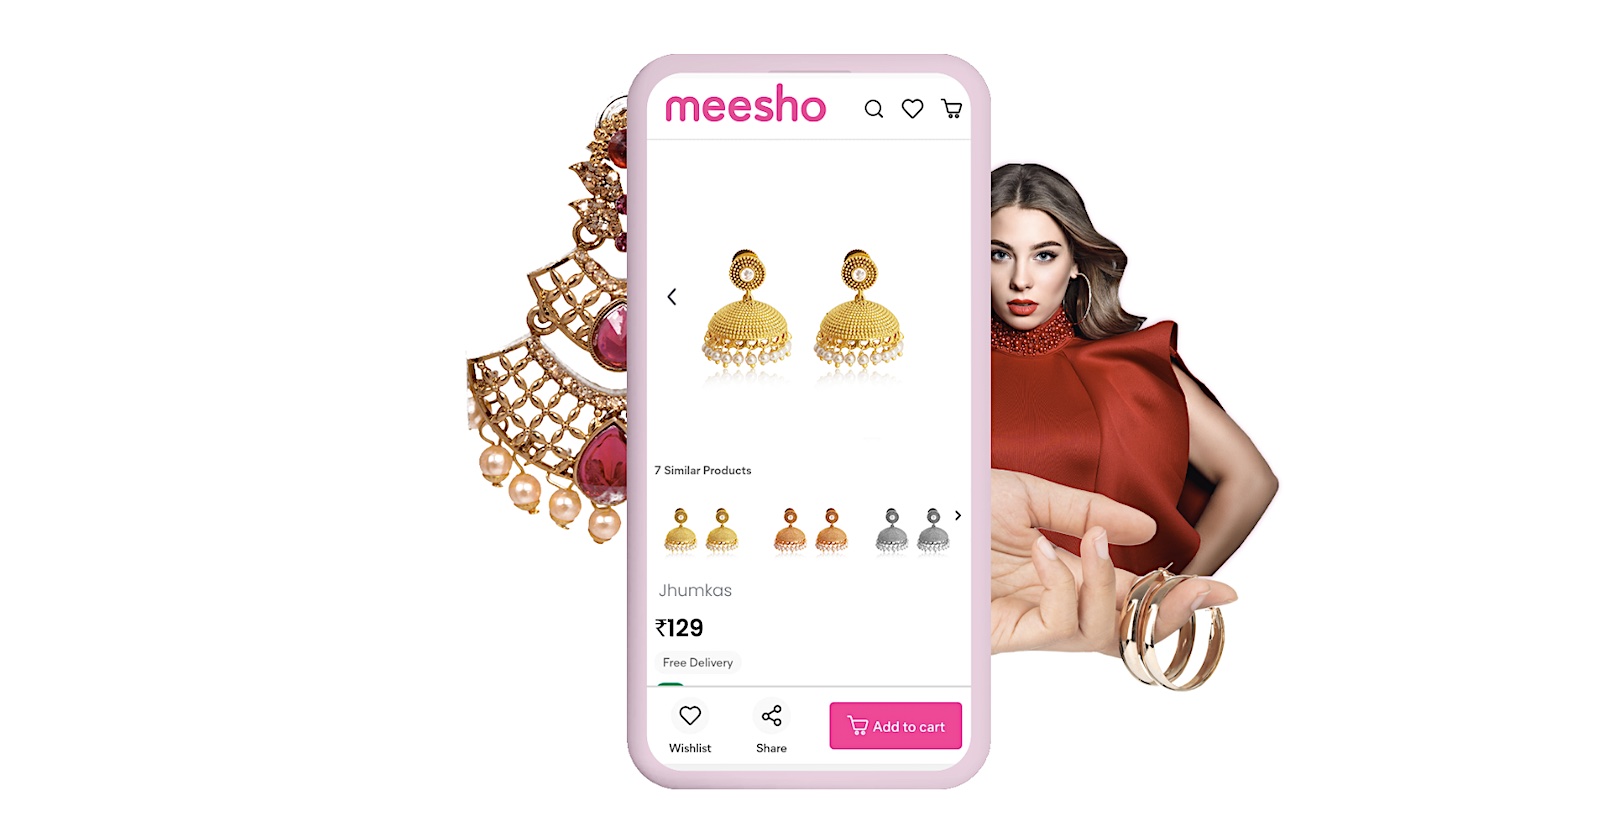 Meesho, an Indian social commerce platform with 150M transacting users, raises $275M